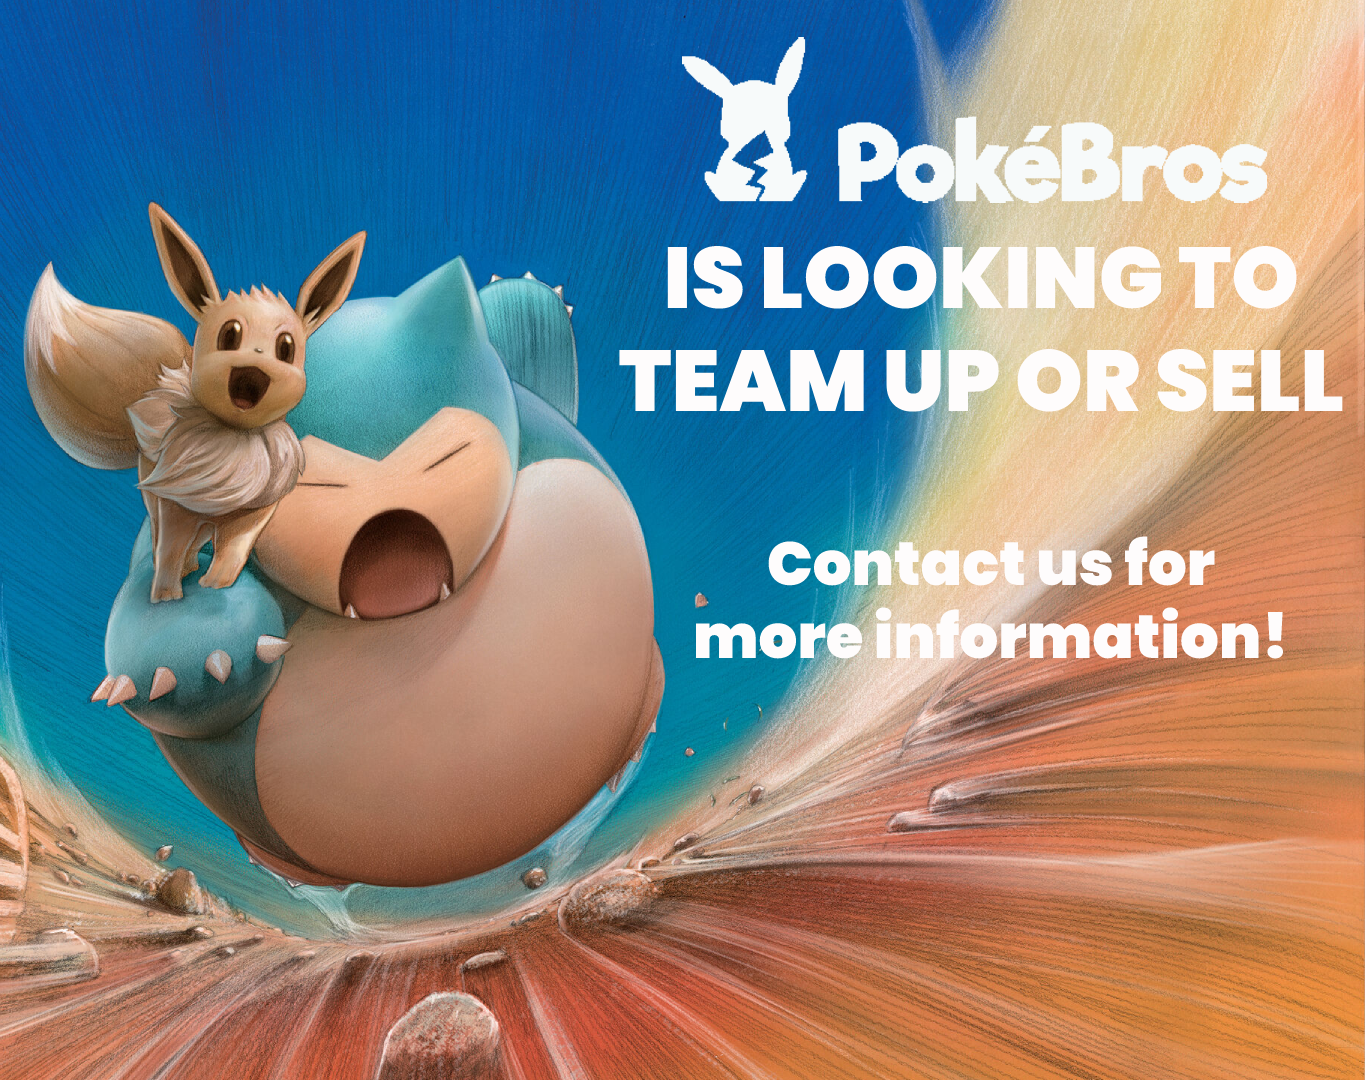 PokéBros is looking to partner up or sell!